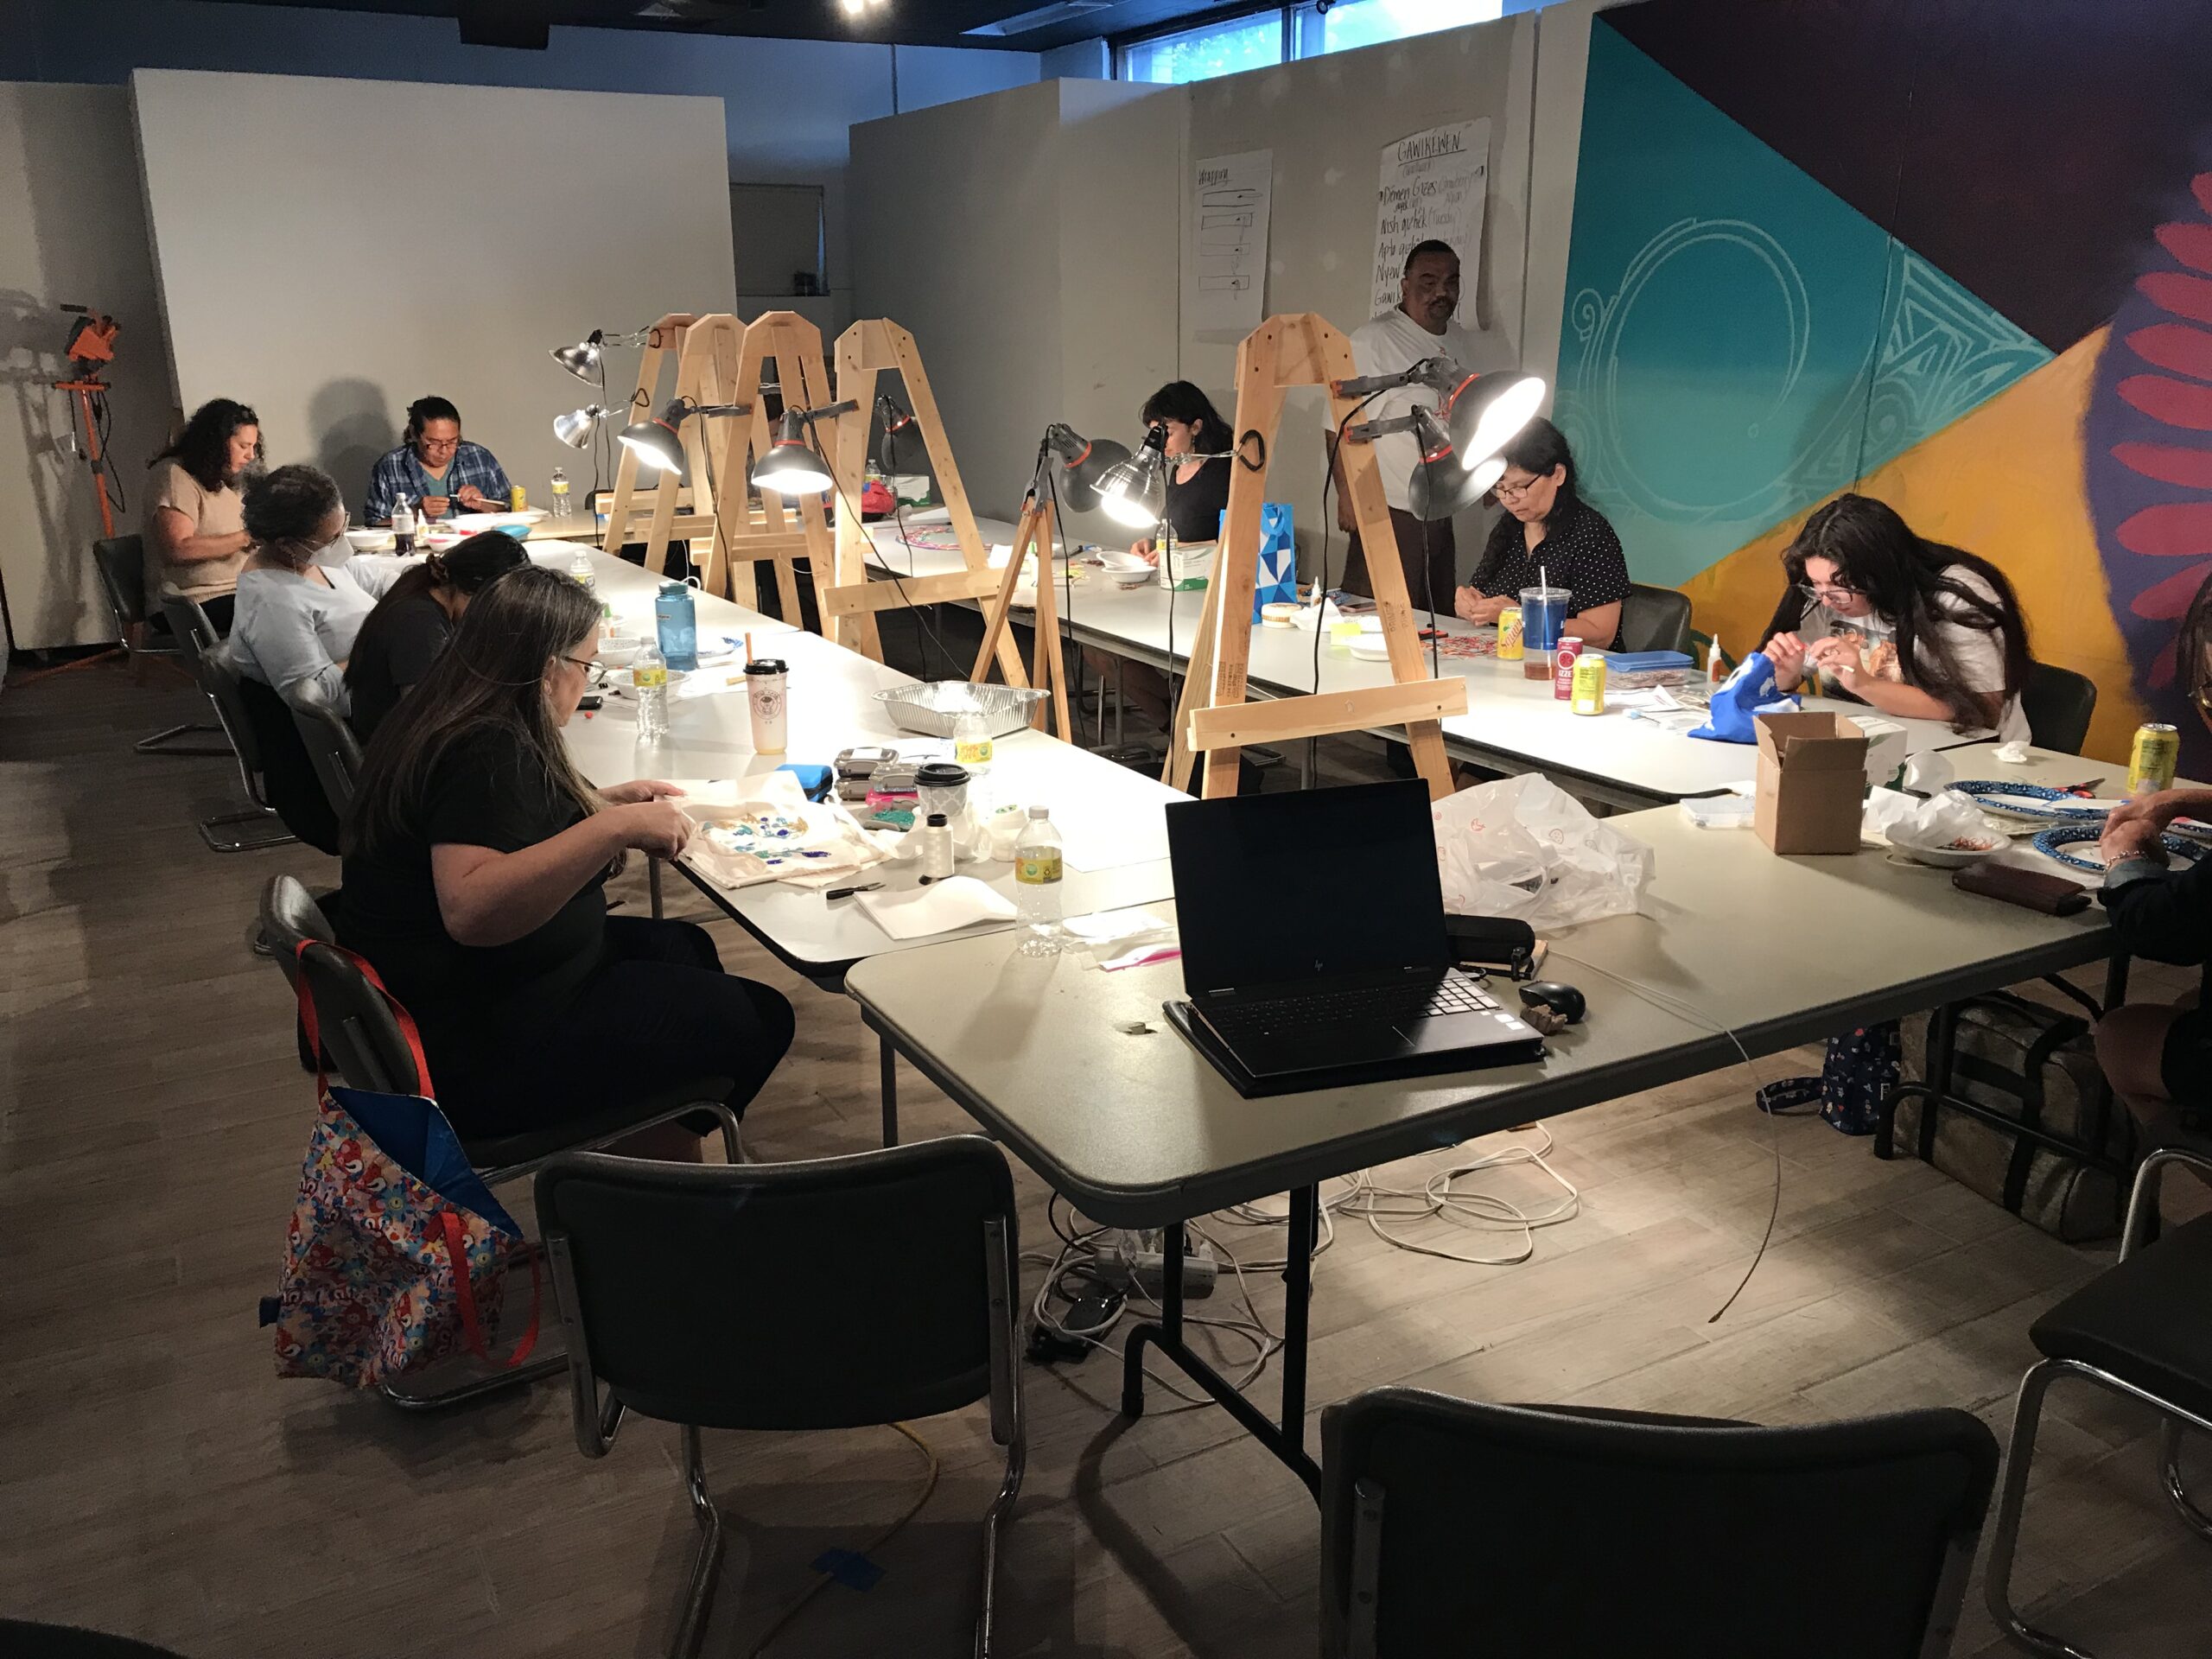 Individuals are seated at tables working on a craft project.